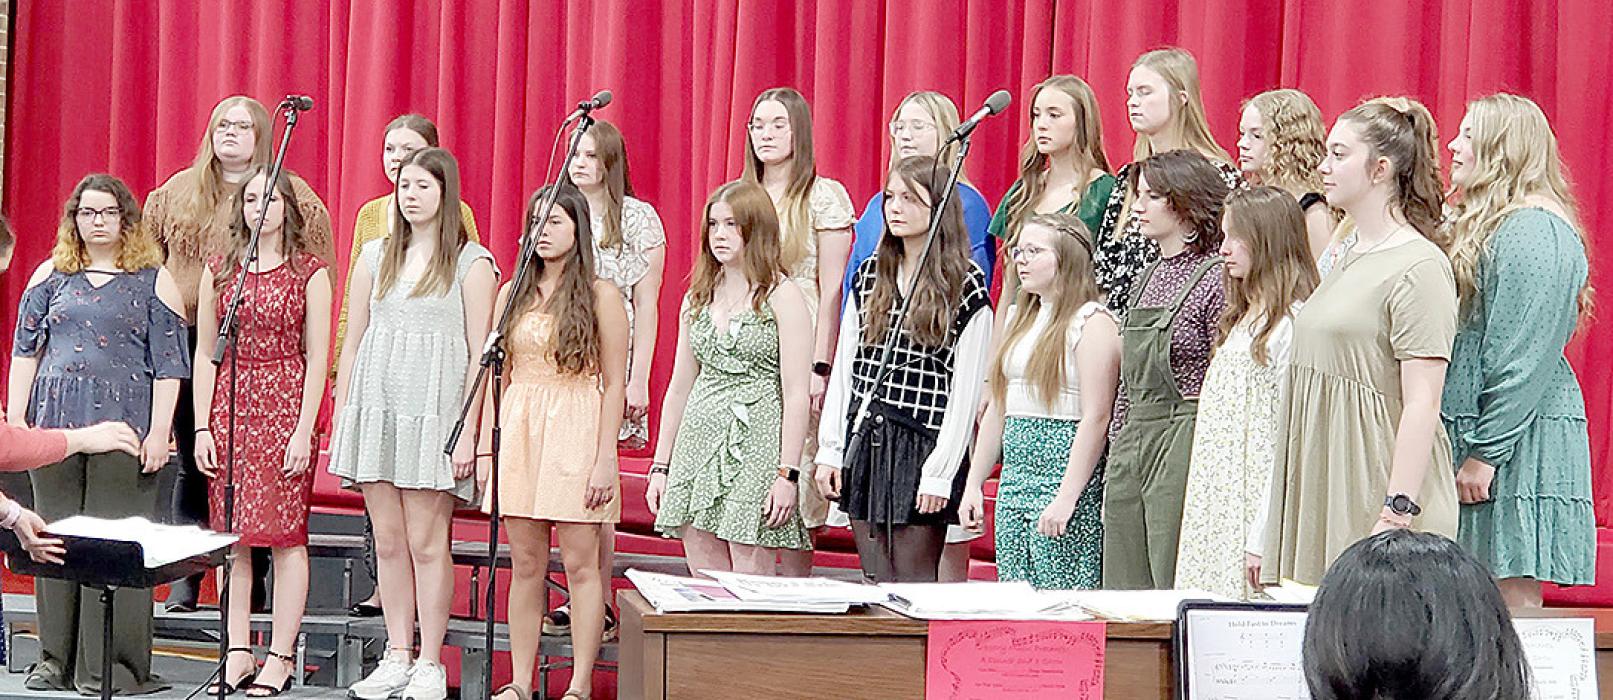 The girls vocal group was pitch perfect in their performance of Hold Fast to Dreams by Susan LaBarr.